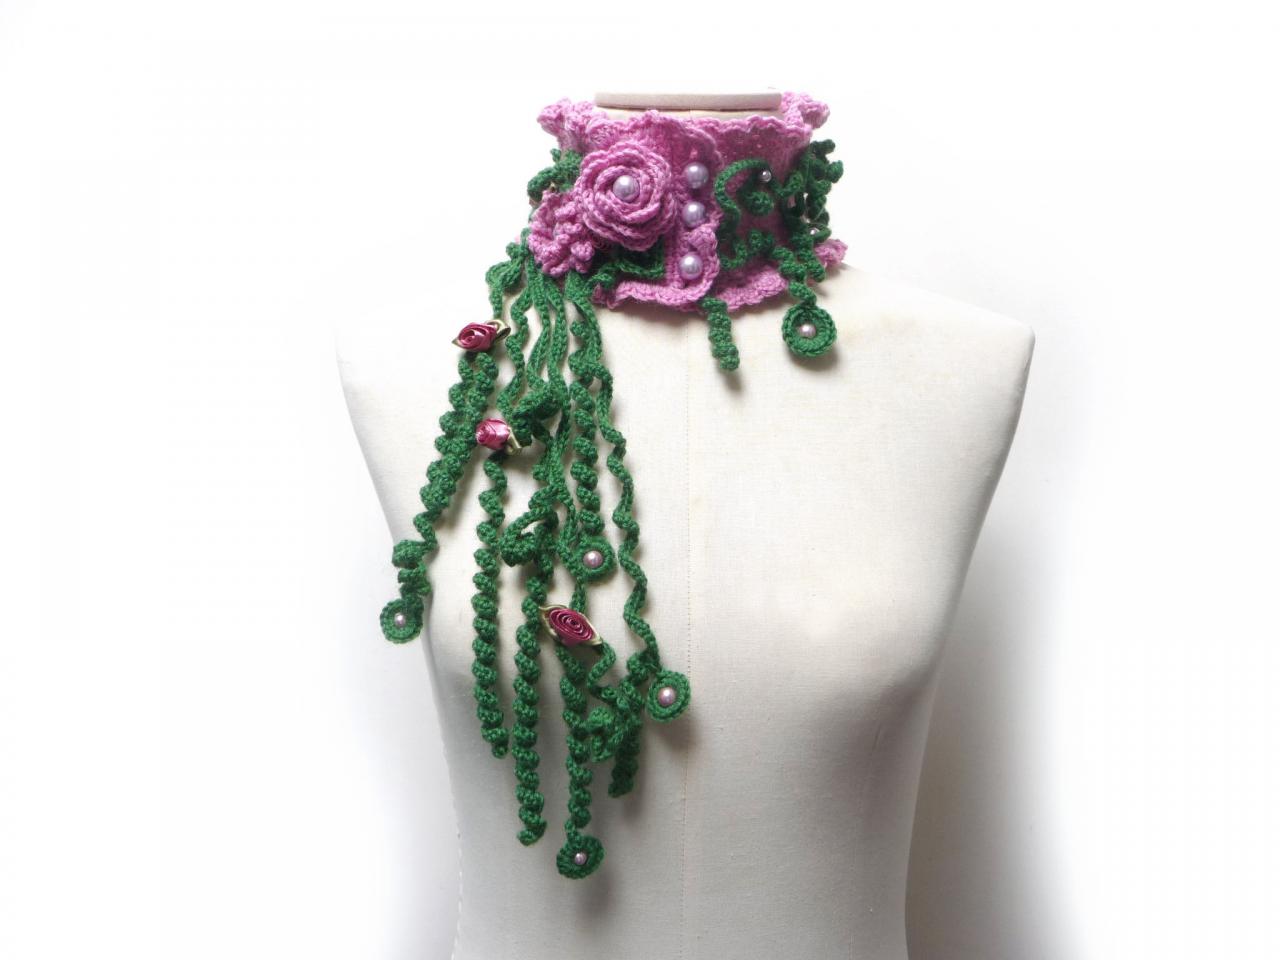 Wool Crochet Scarf Necklace With Pink And Green Flowers, Pearls And Leaves - Freeform Floral Cowl / Neckwarmer - Muriel